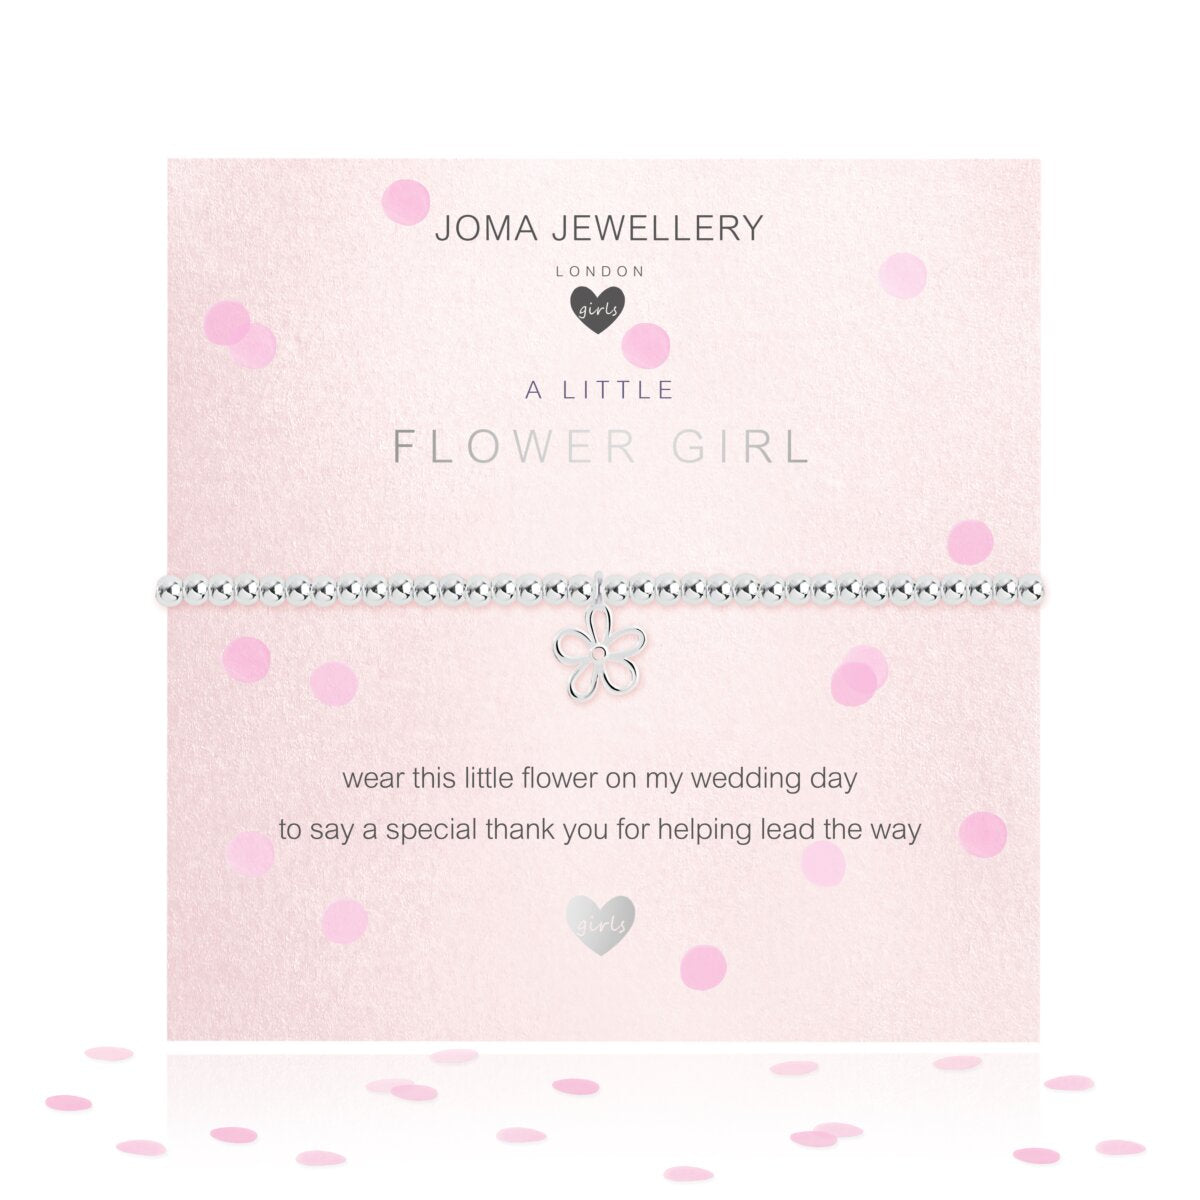 wear this little flower on my wedding day, to say a special thank you for helping me lead the way  This beautiful silver-plated bridal ‘A Little’ is finished with delicate pink confetti in the packaging for an added sprinkle of love and wedding day happiness!